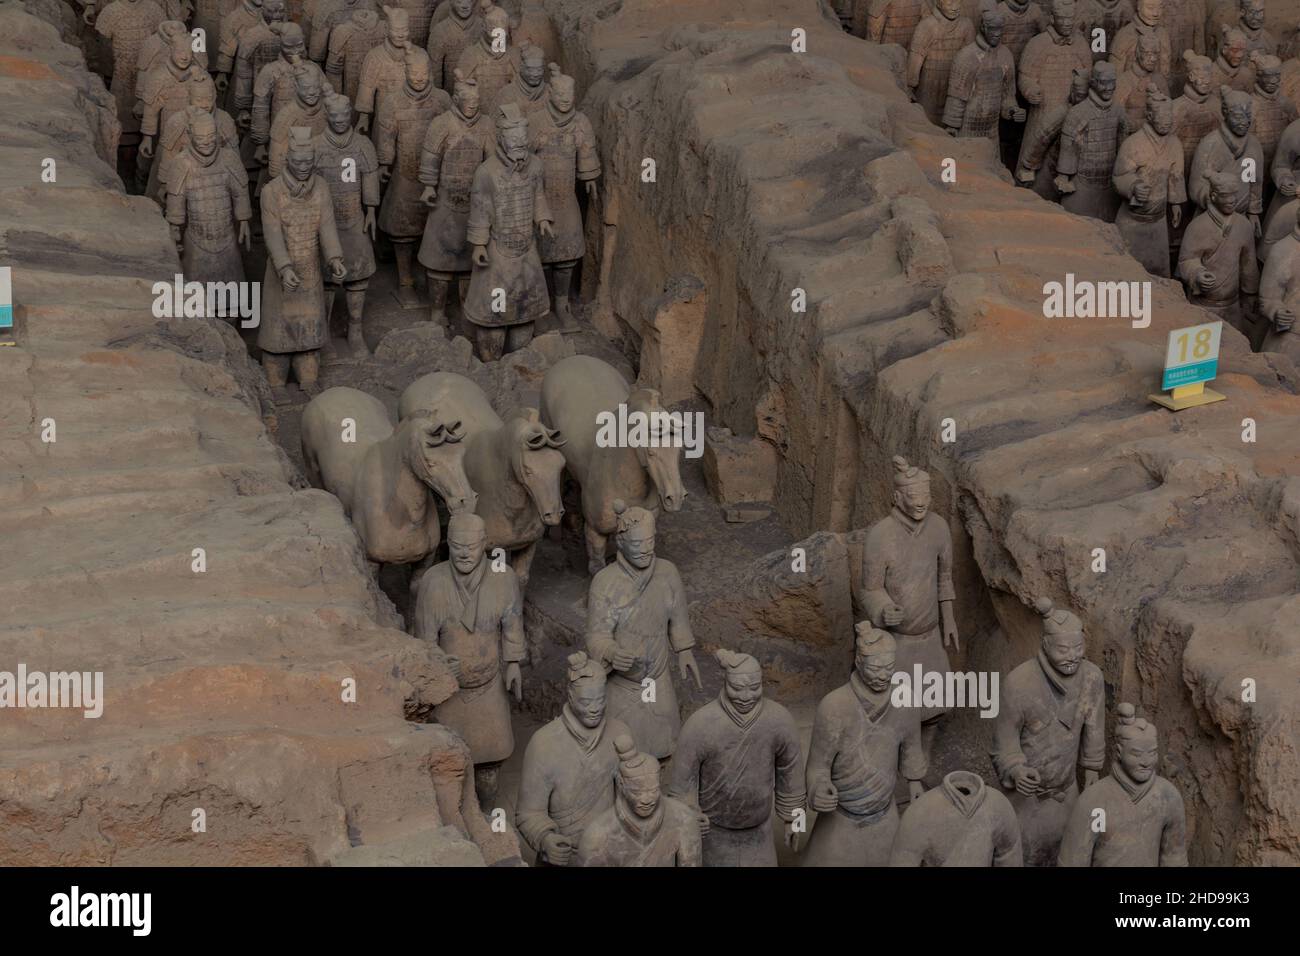 XI'AN, CHINA - AUGUST 6, 2018: Soldiers with horses in the Pit 1 of the Army of Terracotta Warriors near Xi'an, Shaanxi province, China Stock Photo